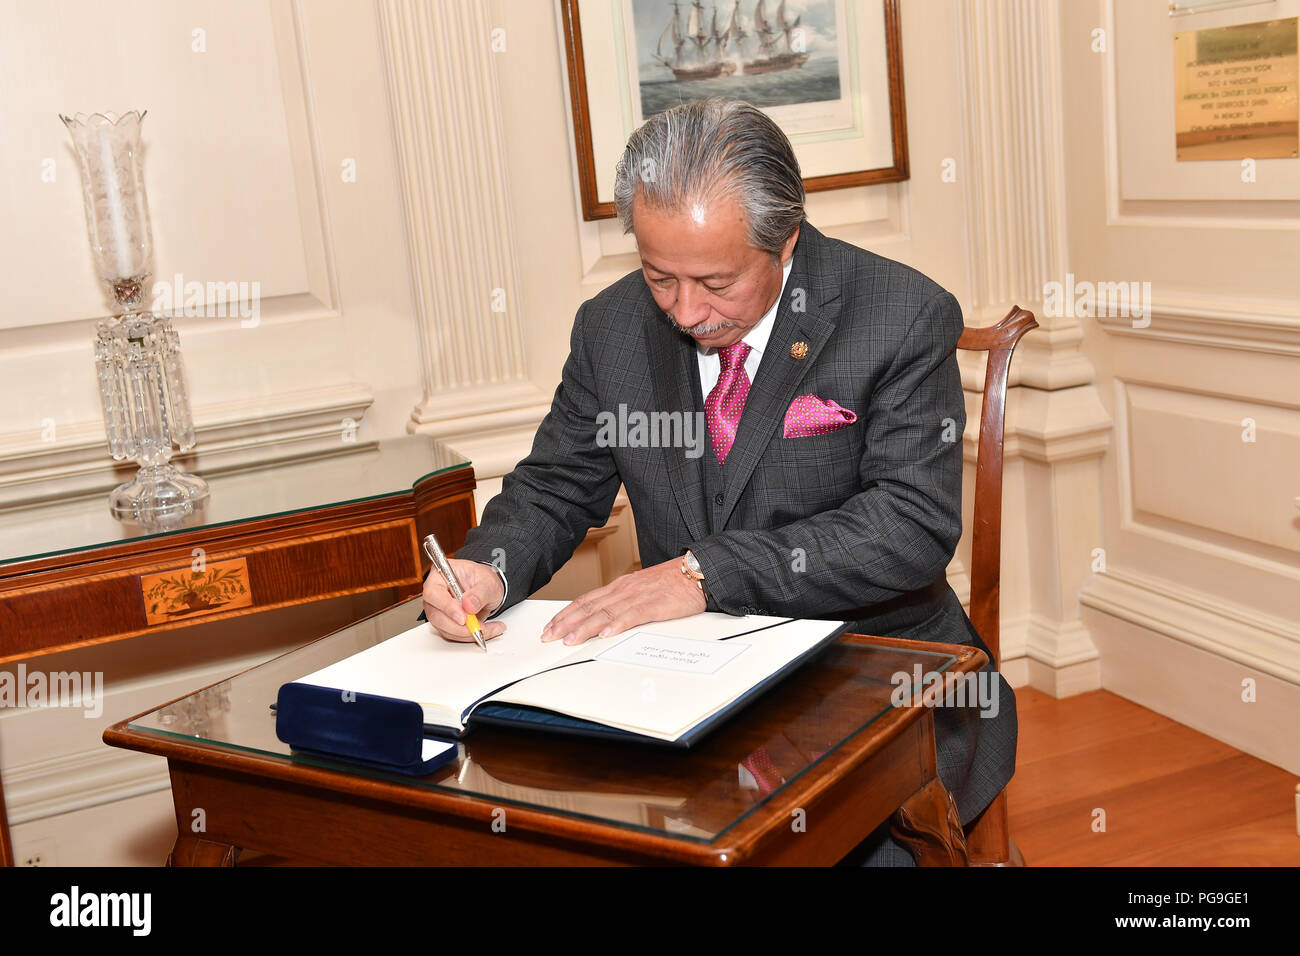 Malaysian Foreign Minister Anifah Aman signs the guest book at the U.S. Department of State in Washington, D.C. on March 26, 2018. Stock Photo